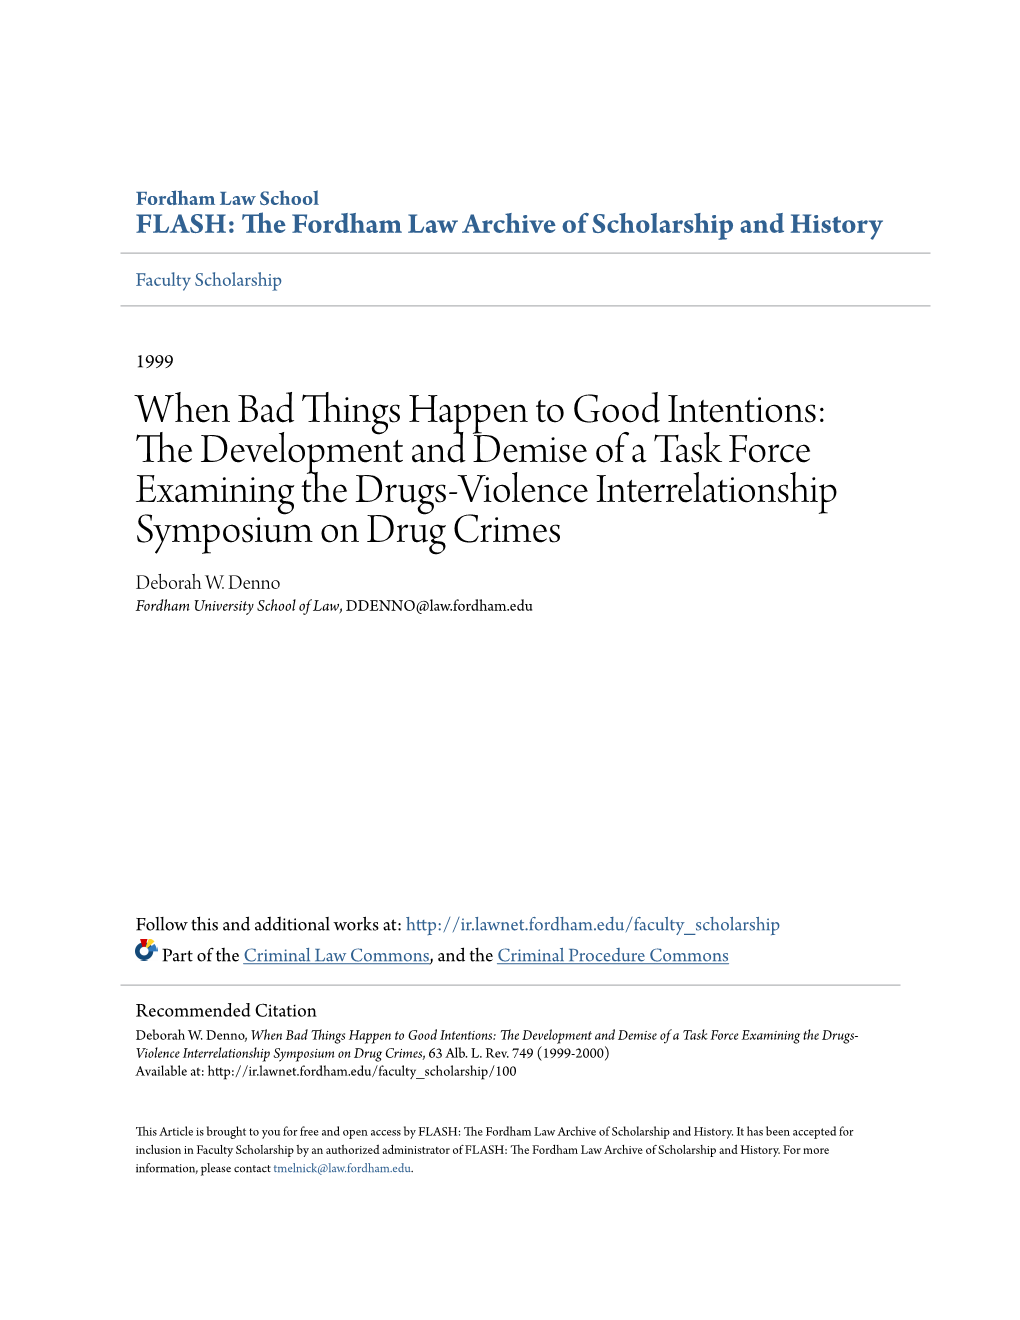 When Bad Things Happen to Good Intentions: the Development and Demise of a Task Force Examining the Drugs- Violence Interrelationship Symposium on Drug Crimes, 63 Alb